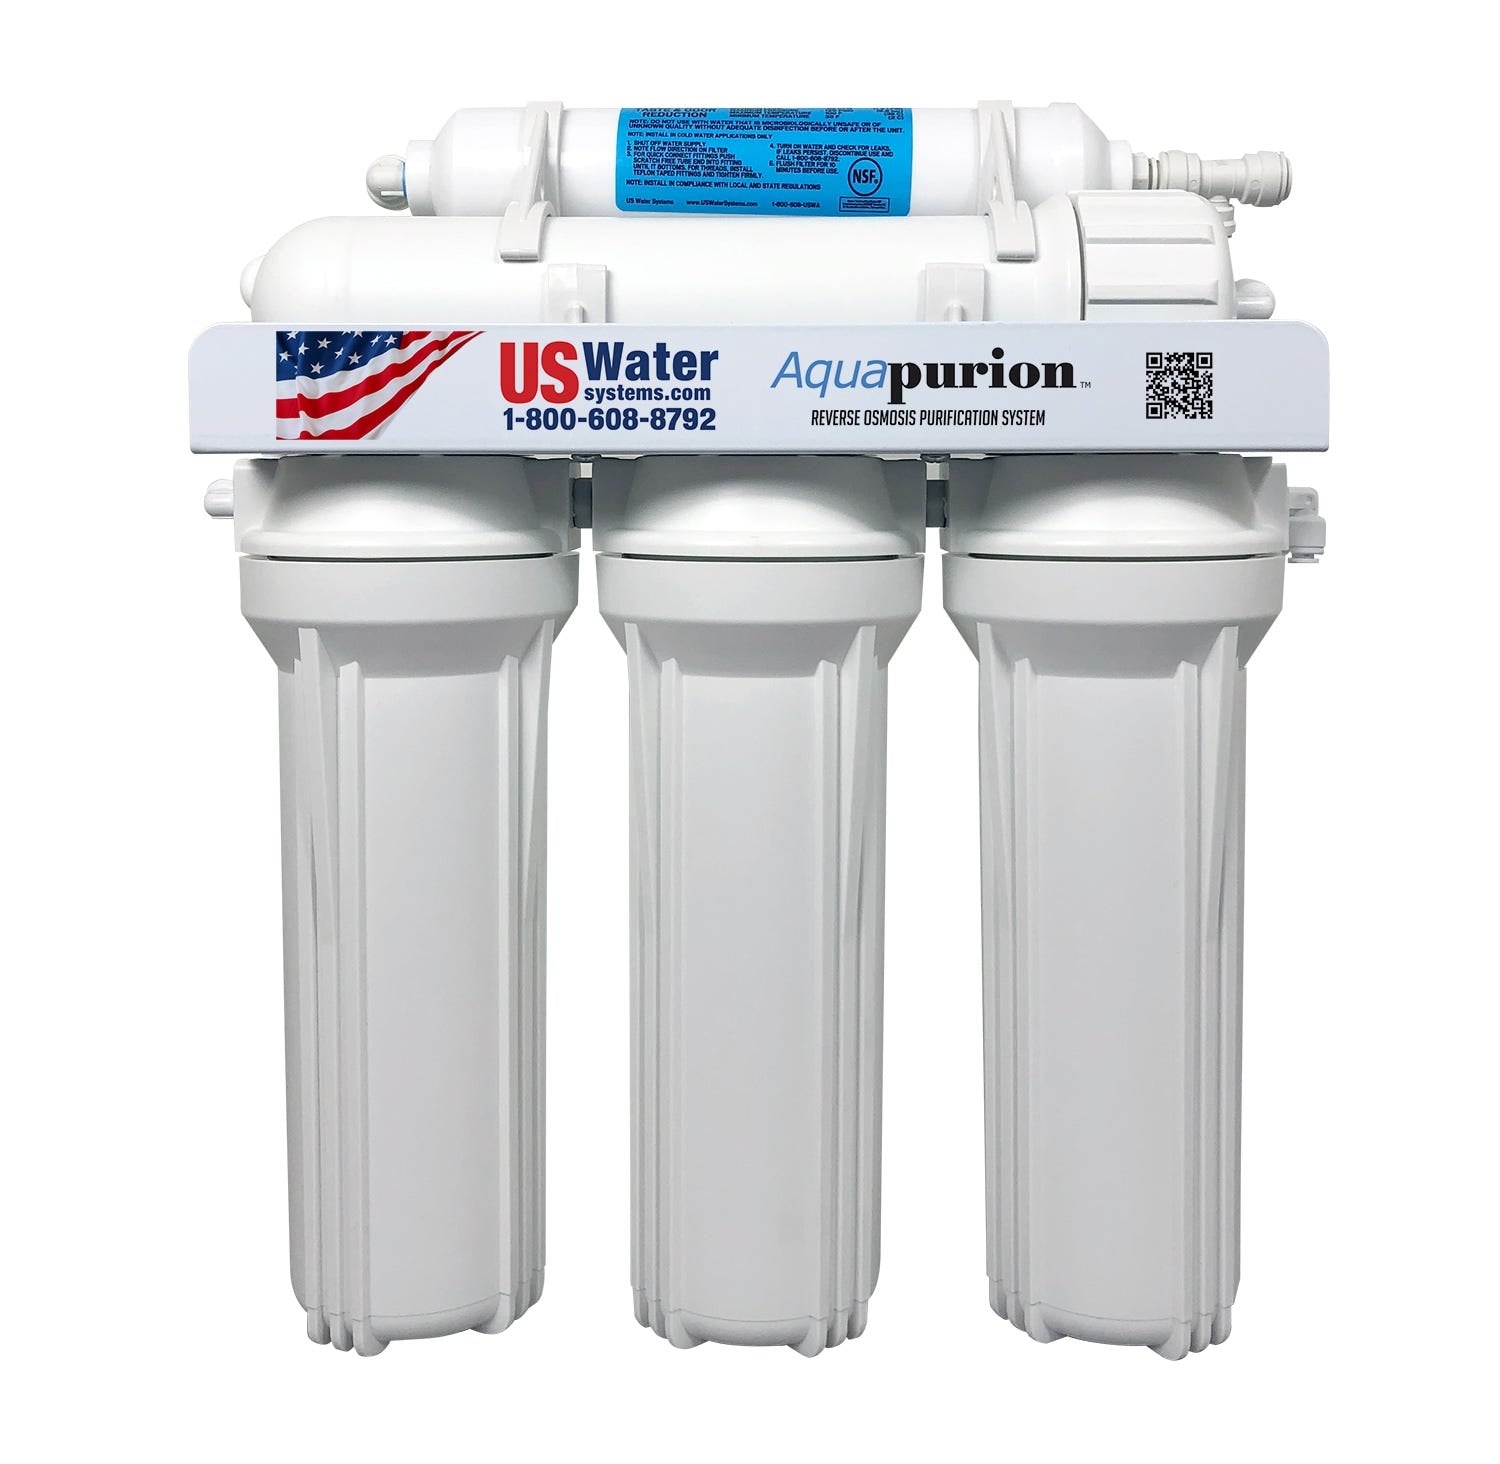 Aquapurion 5-Stage Reverse Osmosis System for Home On Sale Cheap